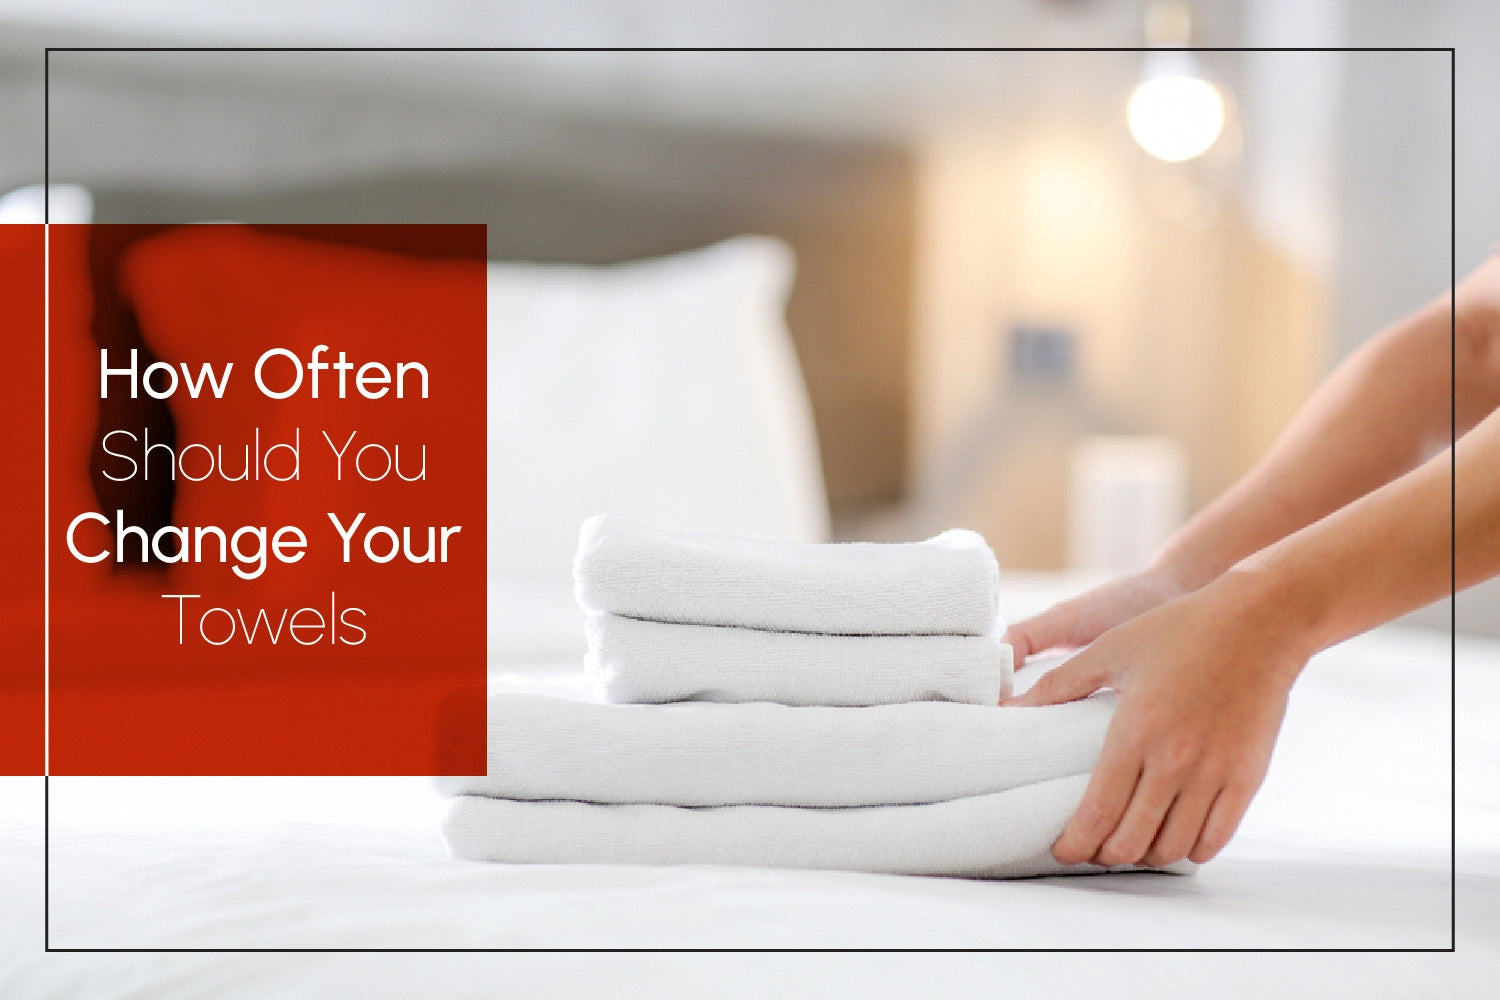 How often should you wash and change your towel?